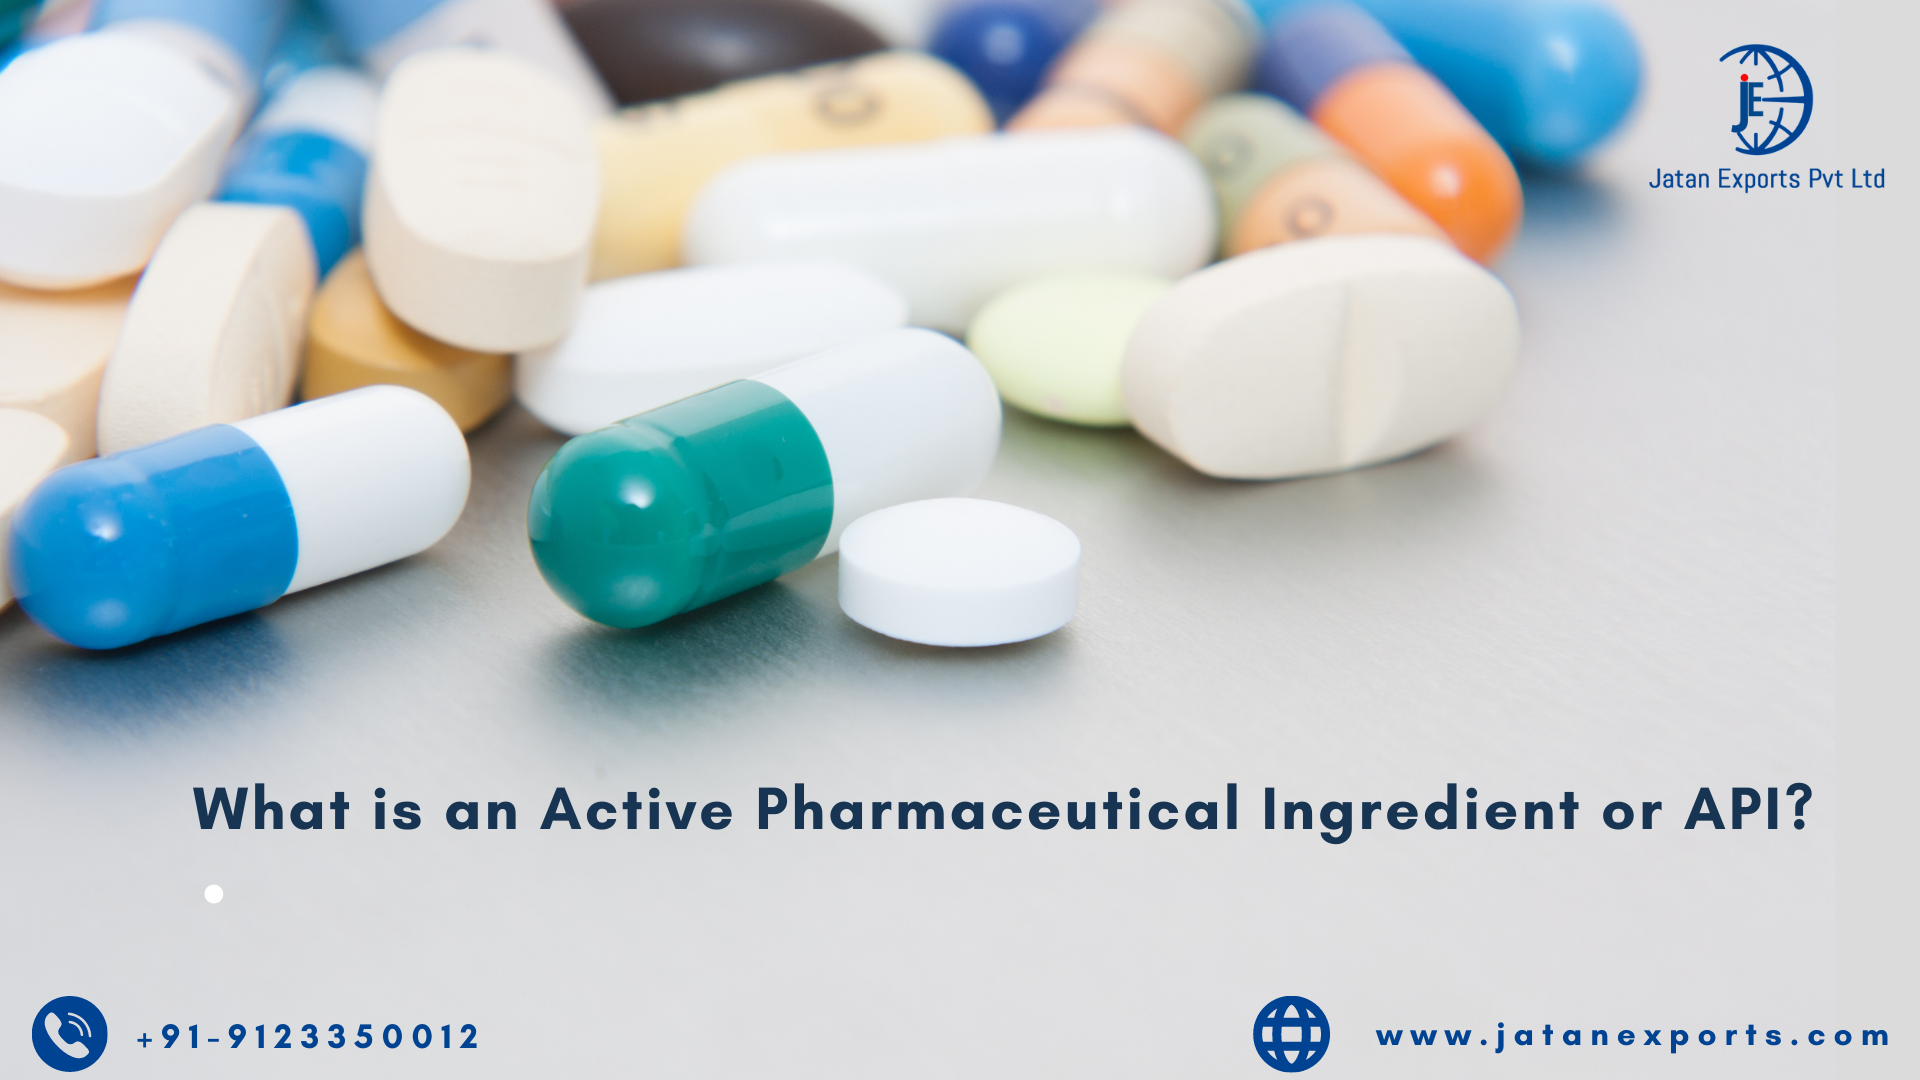 What is an Active Pharmaceutical Ingredient